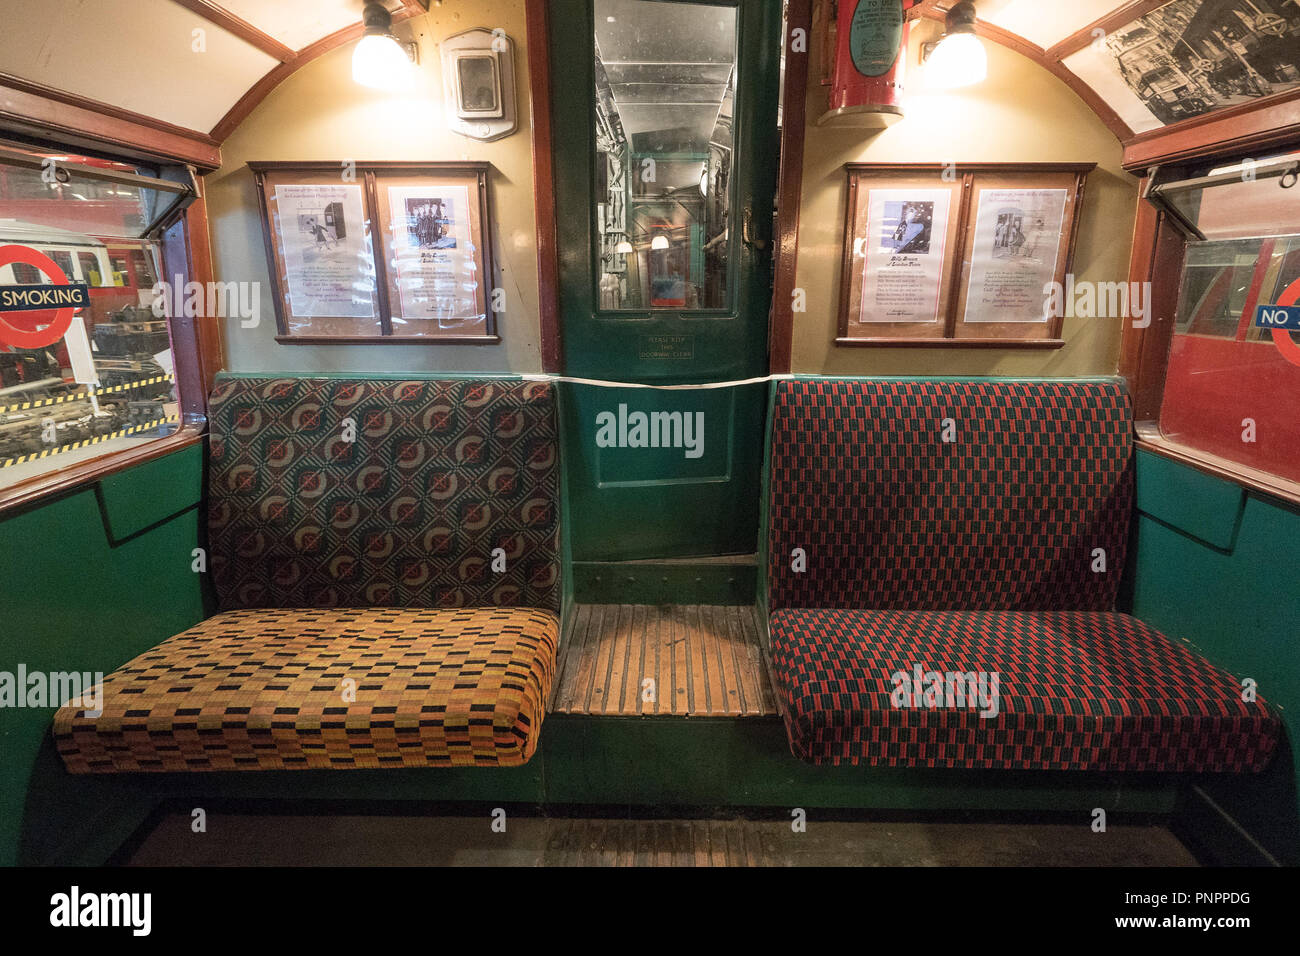 The interior of an old tube carriage at the London Transport Museum Depot, which opens its doors to the public twice a year. Photo date: Saturday, September 22, 2018. Photo: Roger Garfield/Alamy Live News Stock Photo